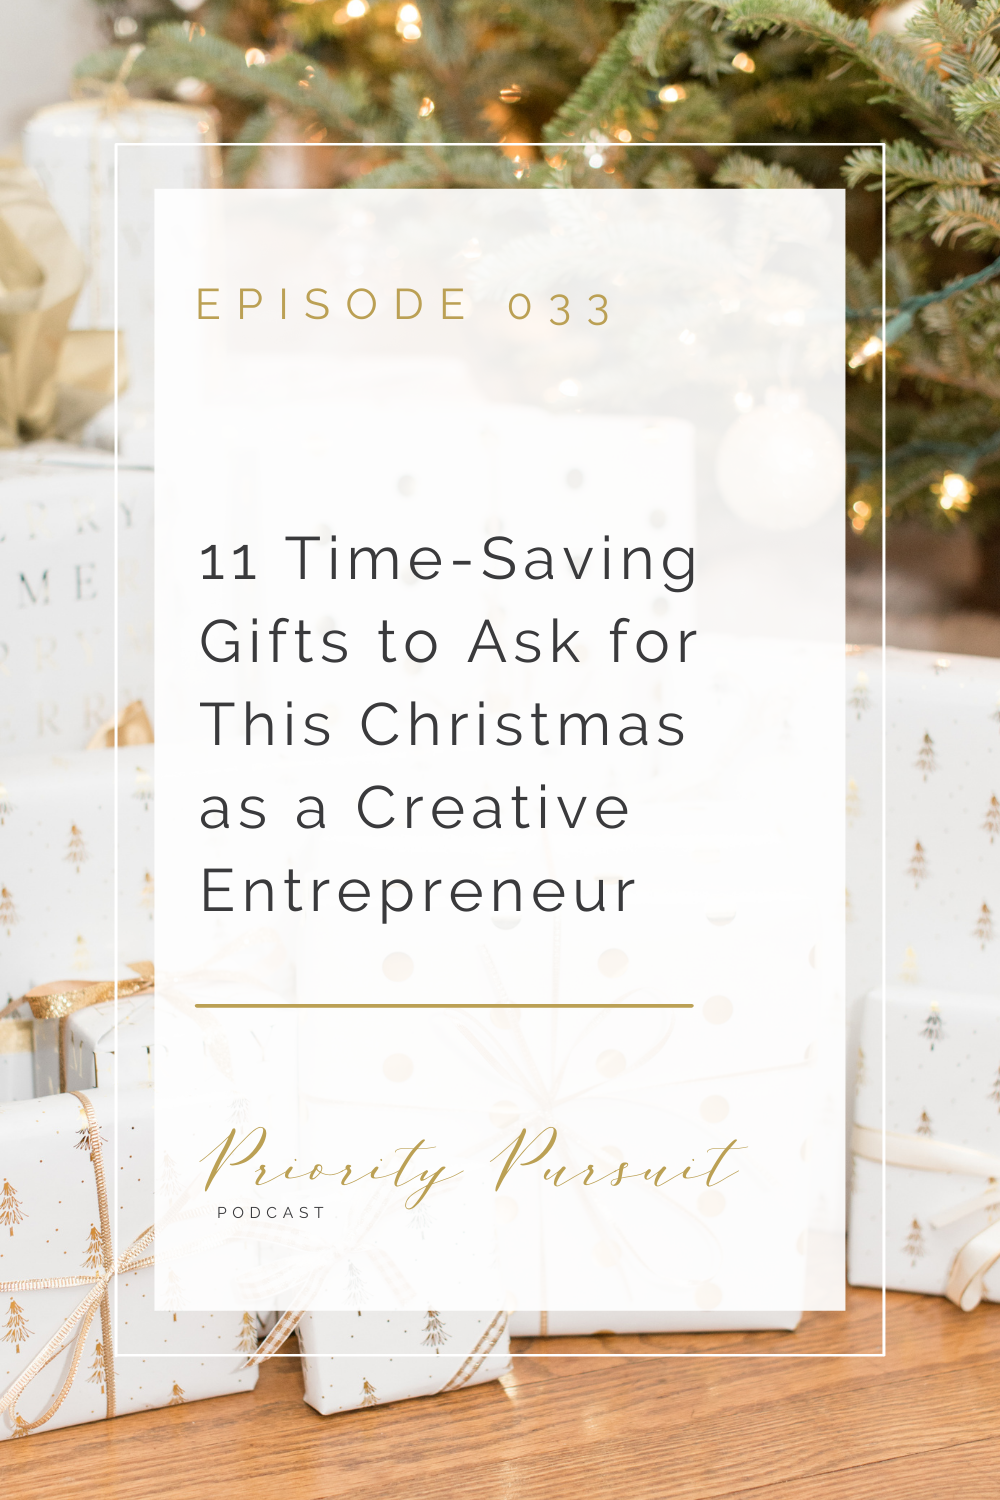 Victoria Rayburn explains 11 time-saving gifts to ask for this Christmas as a creative entrepreneur in this episode of “The Priority Pursuit Podcast.” 